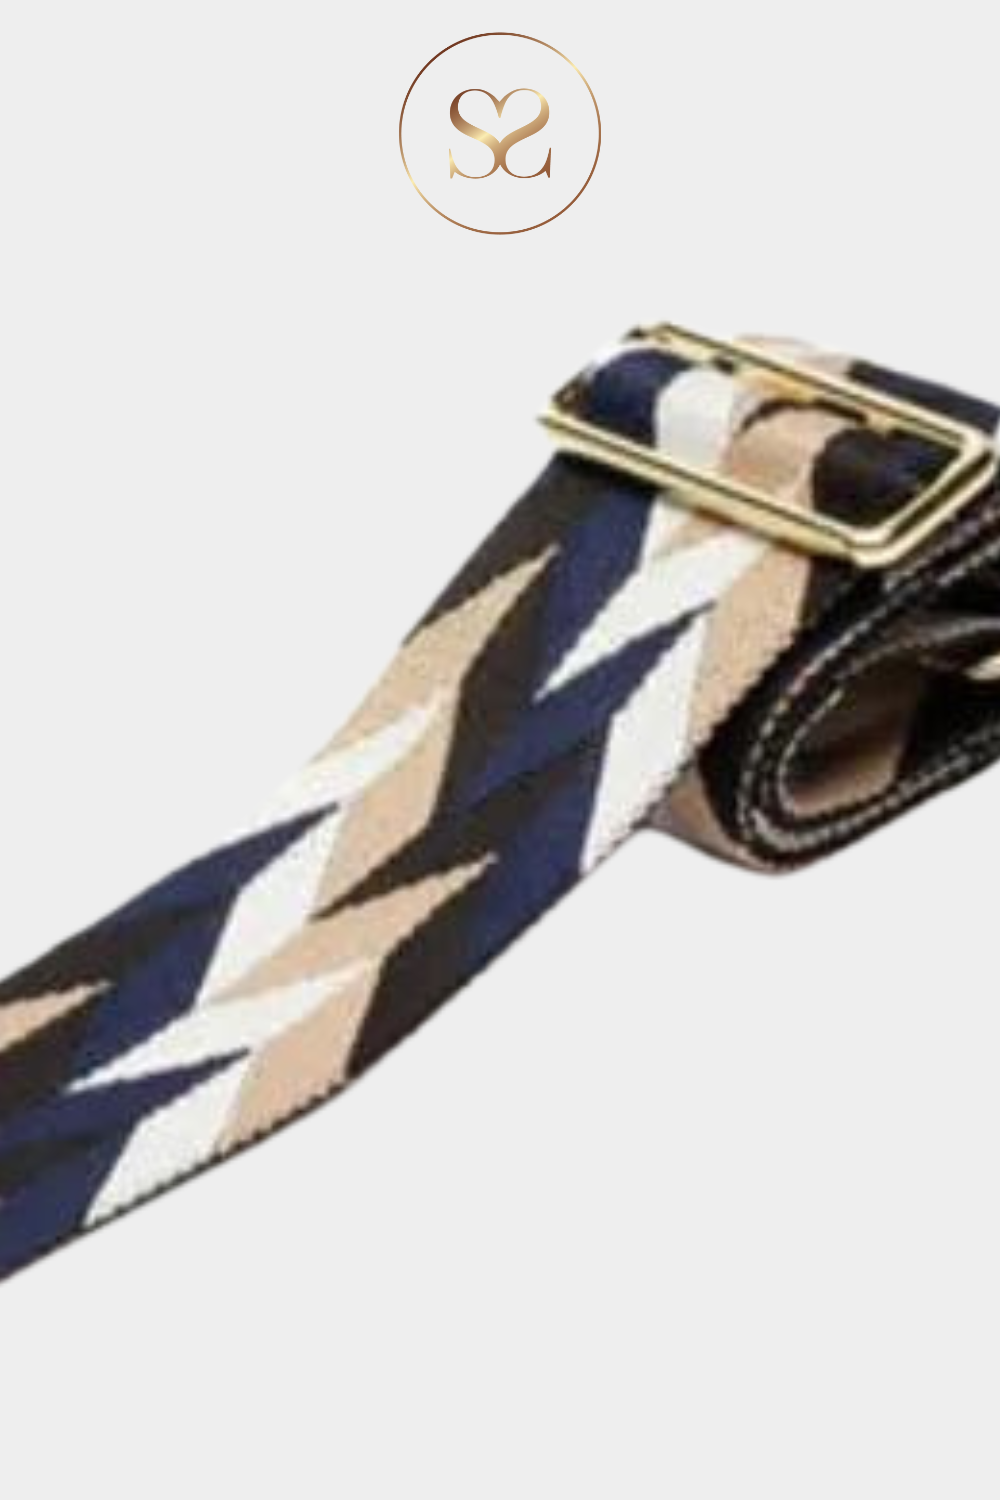 ELIE BEAUMONT CROSSBODY STRAP IN MOSAIC PRINT. NAVY, BLACK, WHITE AND BEIGE COLOUR STRAP